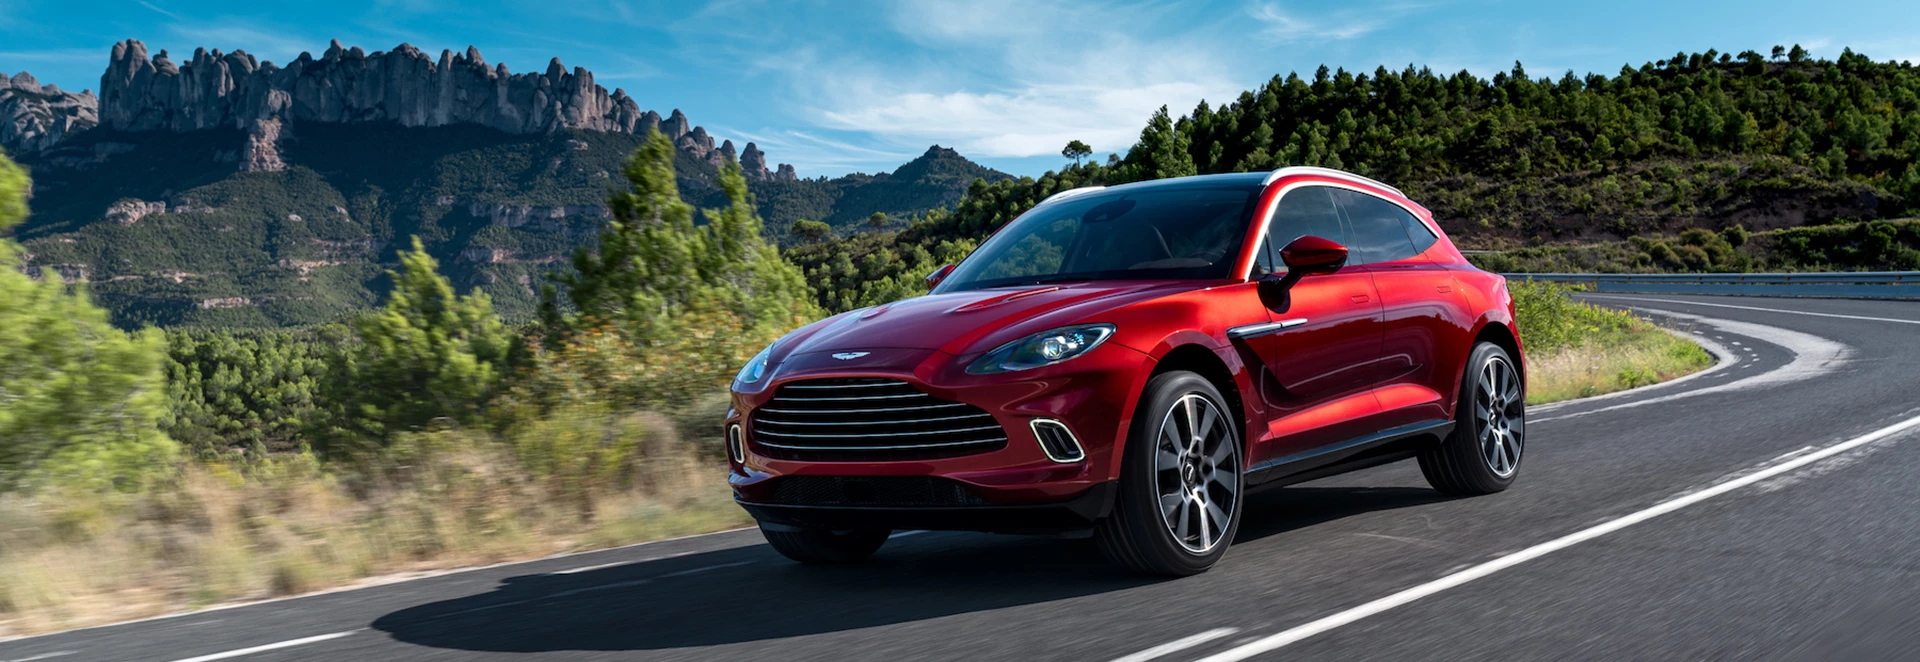 Aston Martin DBX is revealed as the firms first SUV